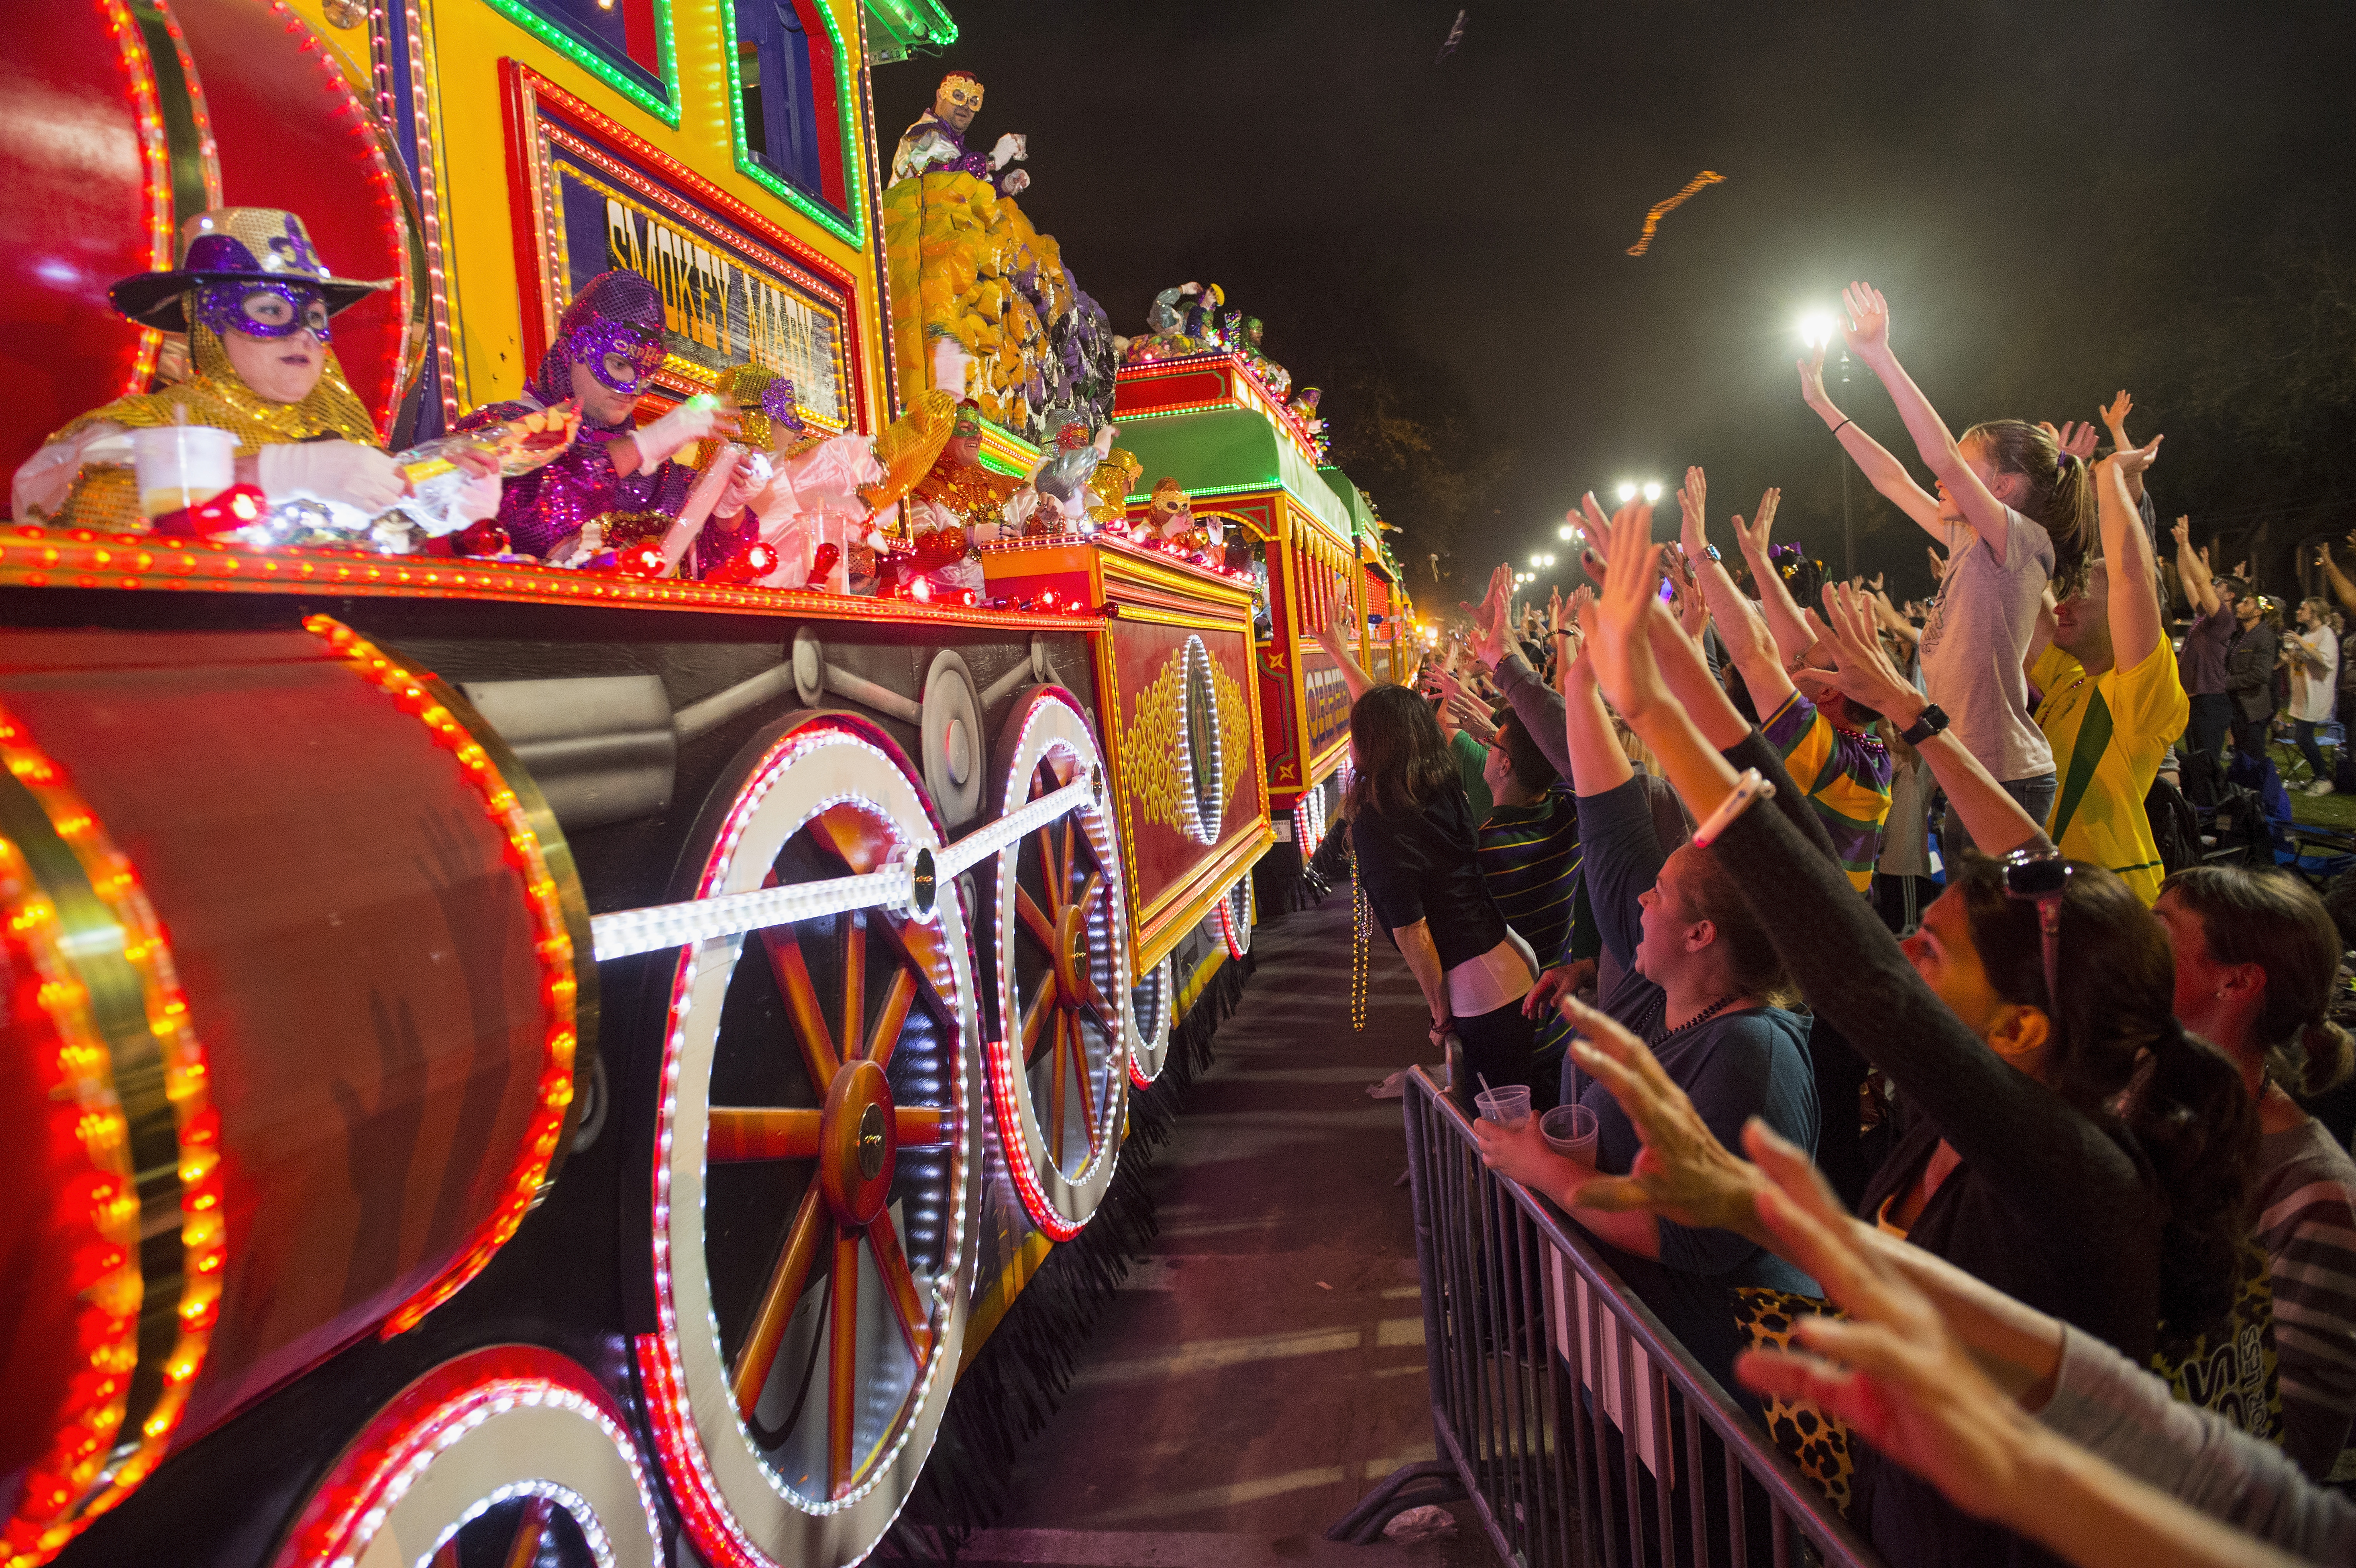 How Much It Would Cost You Now to Book a Last-Minute Mardi Gras Getaway